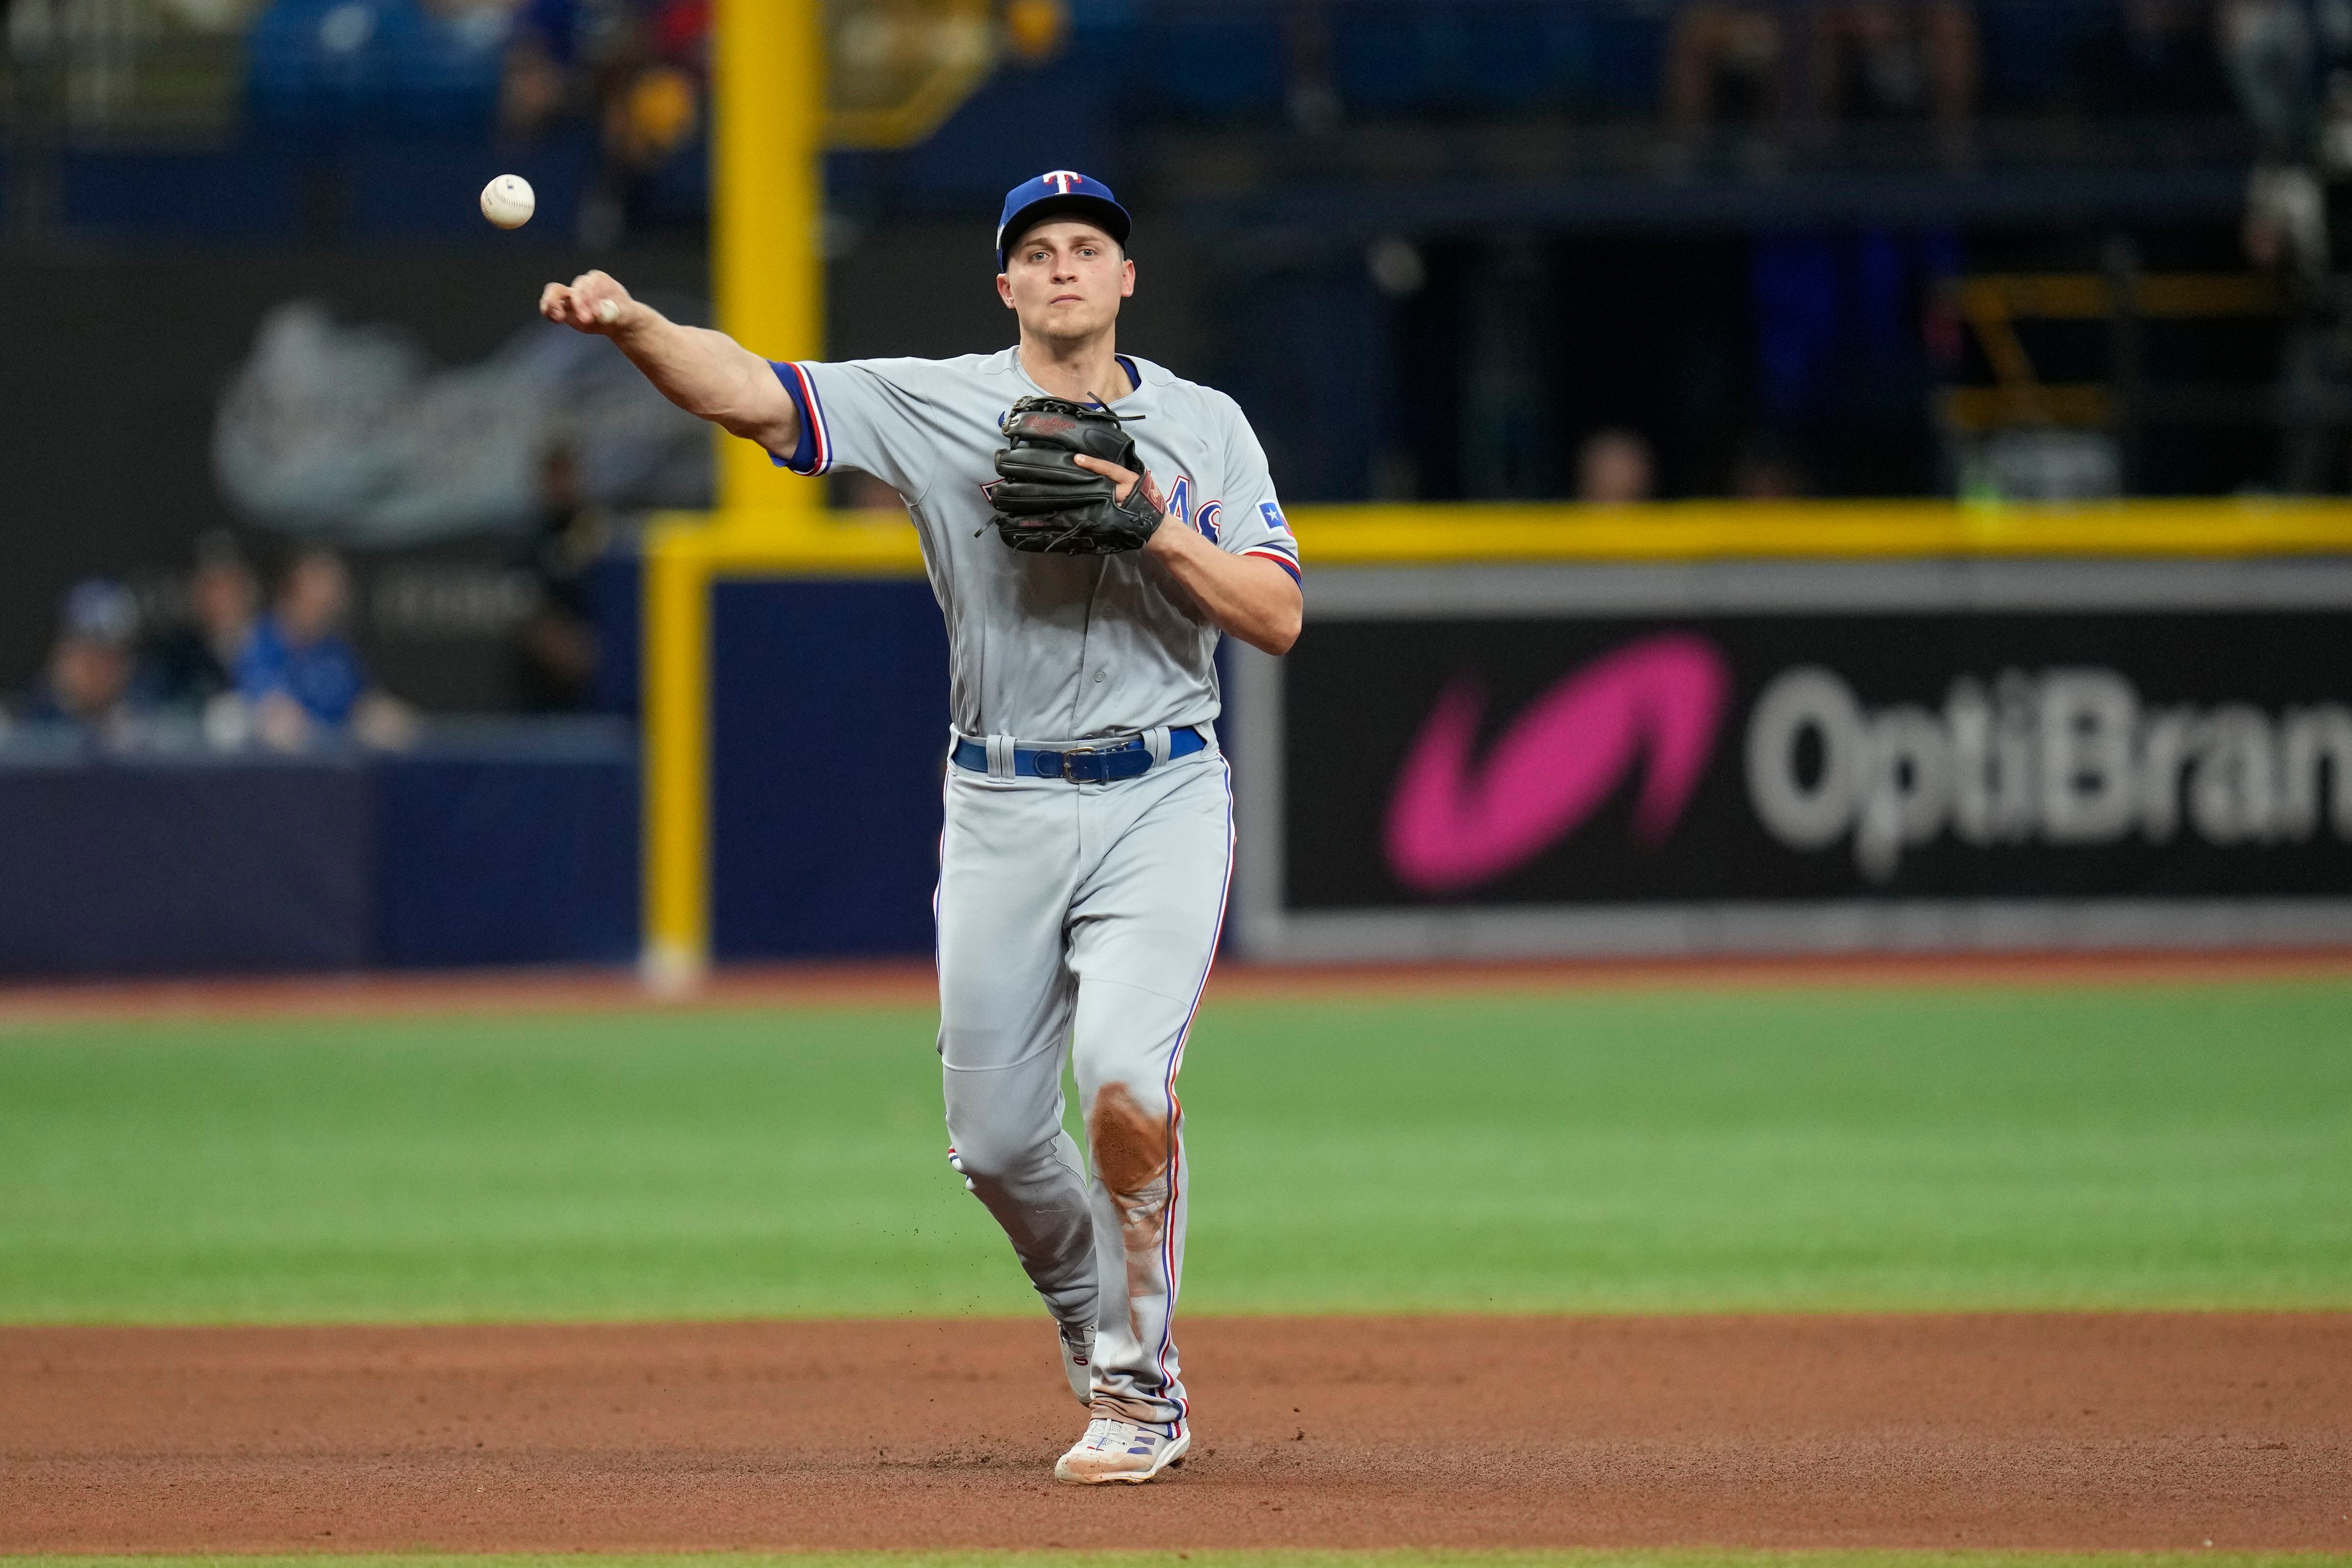 Rays' Wild Card opener draws 19,704, lowest since 1919 for non